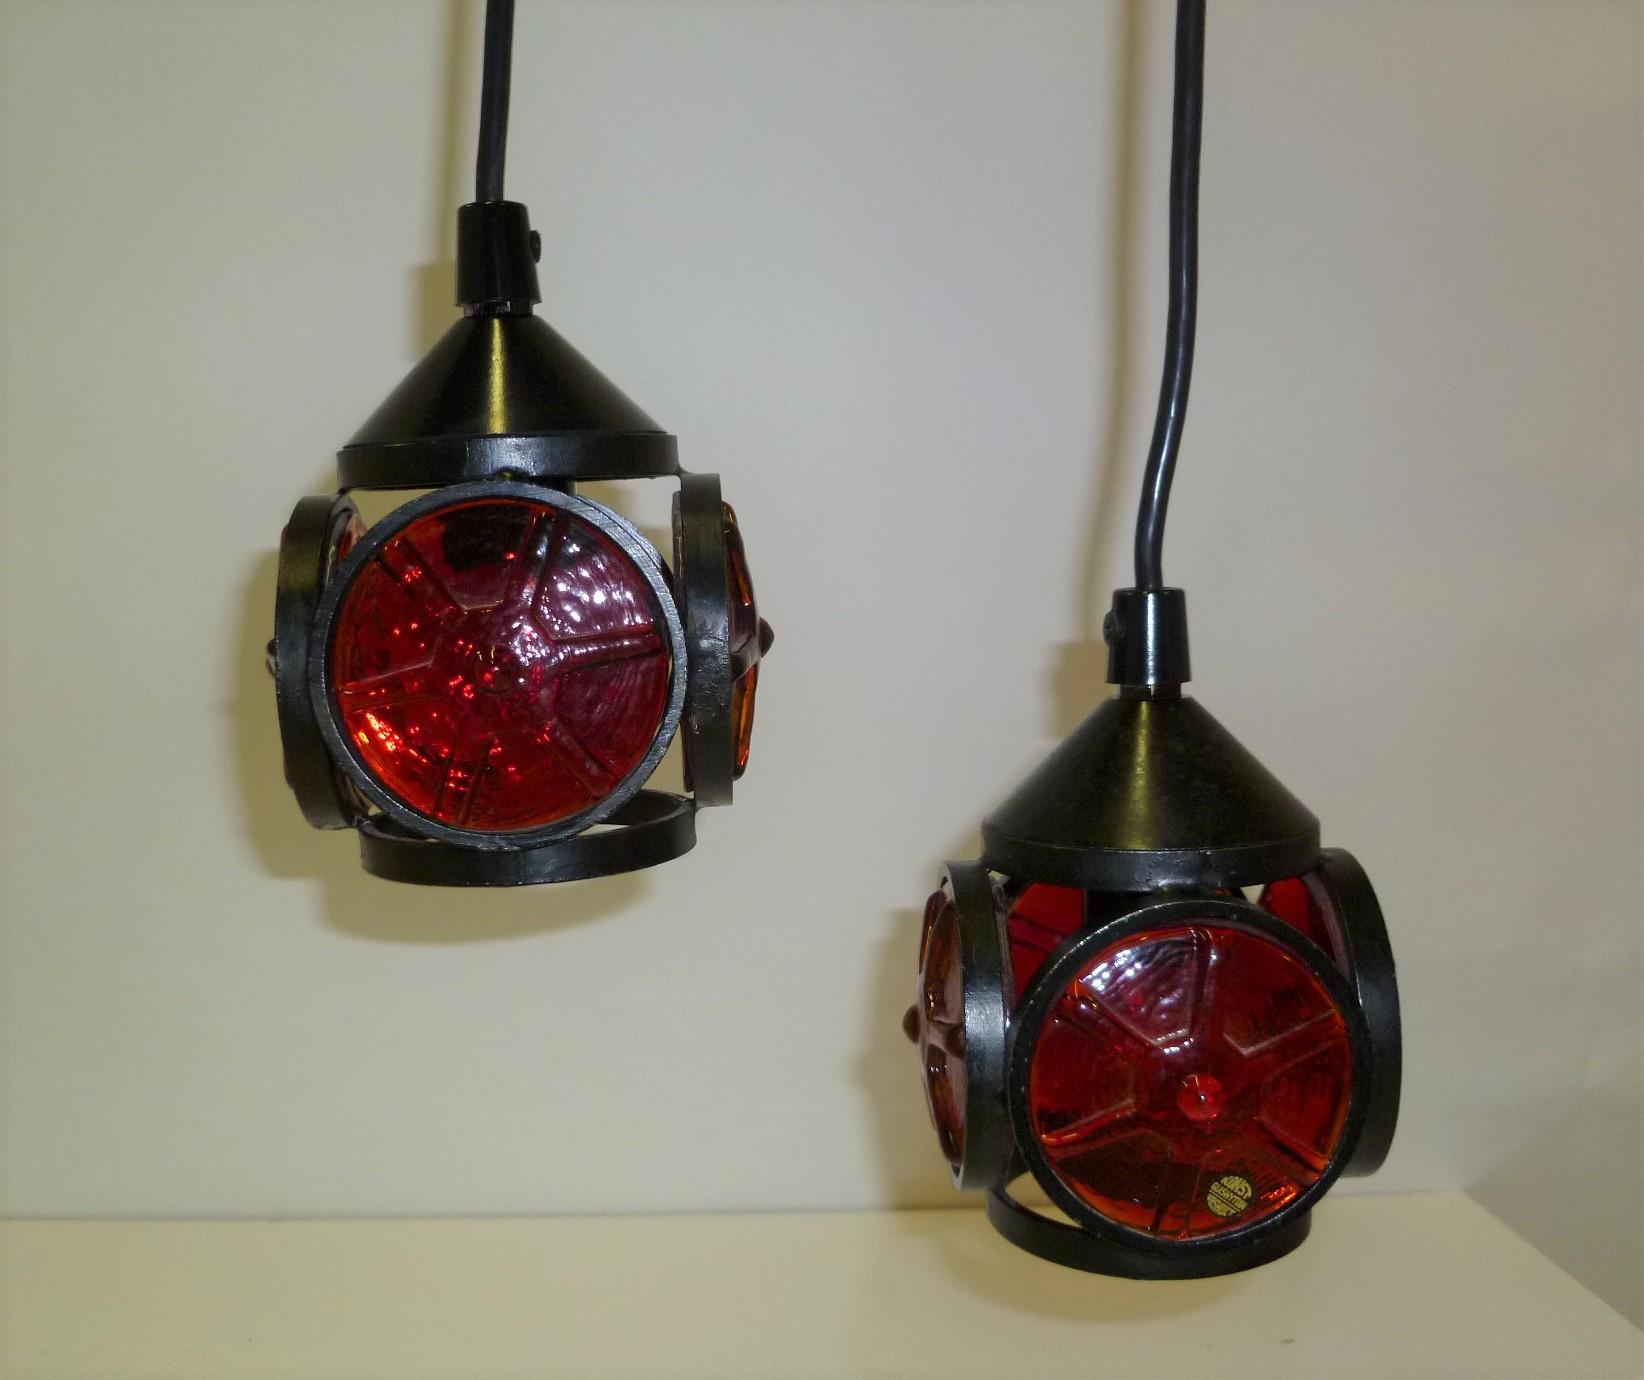 Swedish modern red glass inserts and black metal frame, a pair of small pendants by Konst Glashyttan Urschult, Sweden from the 1970s. The red glass inserts were made in the manner of Erik Hoglund, thick and heavy, and resemble the steering wheel of